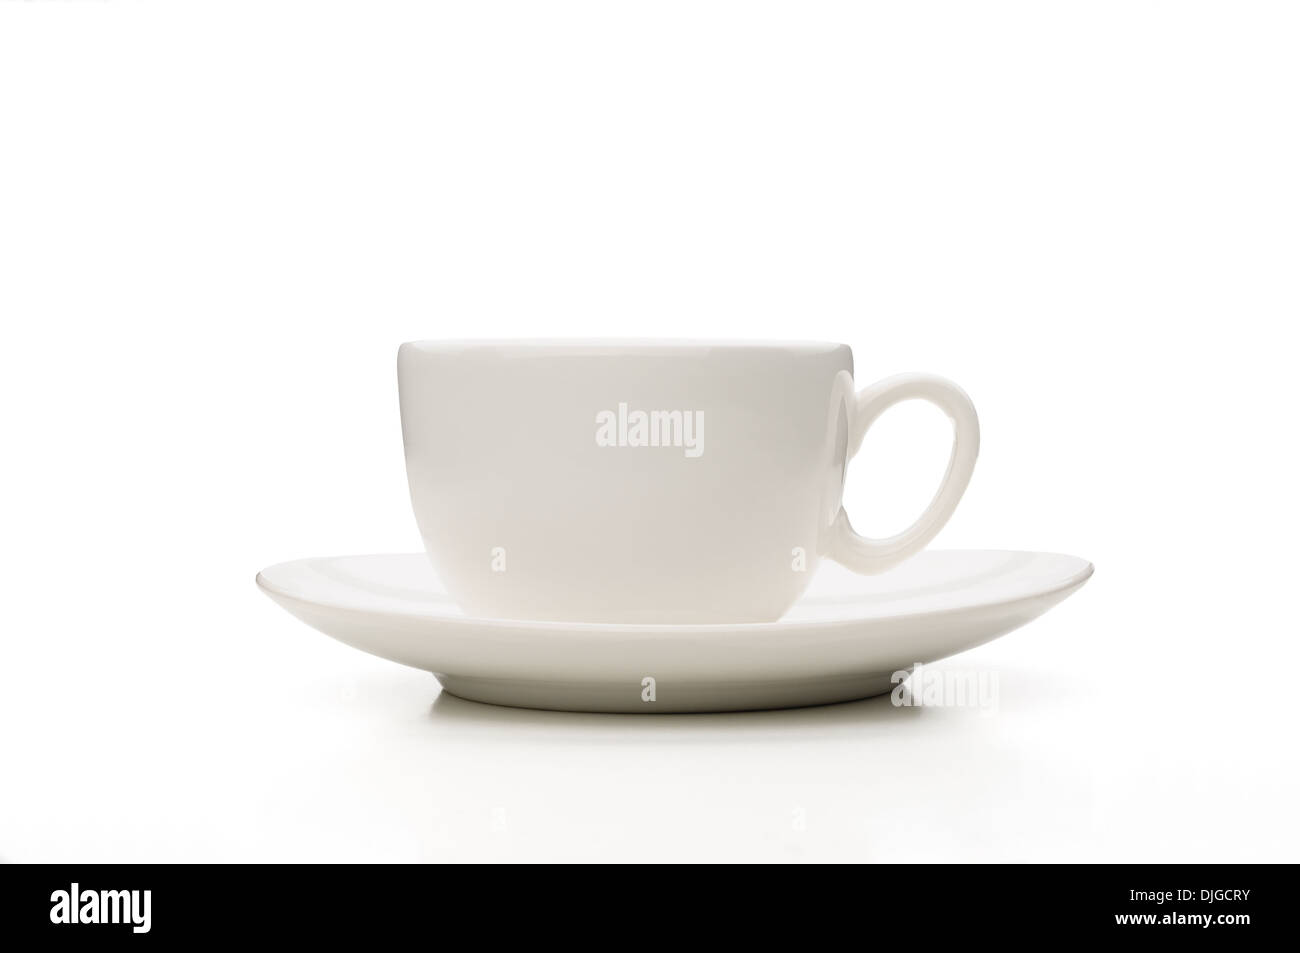 A simple white tea or coffee cup viewed from profile Stock Photo